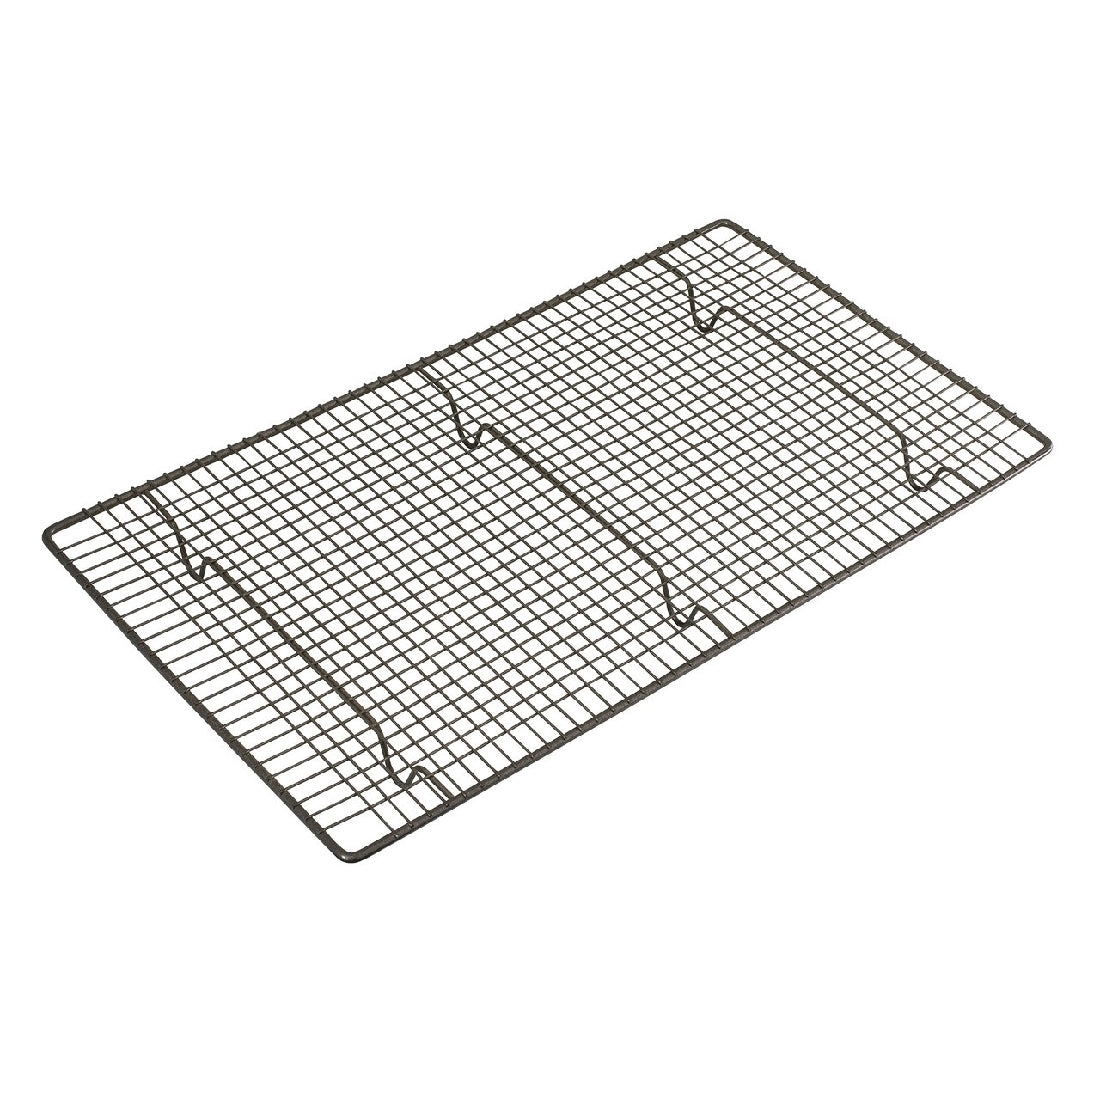 Bakemaster Cooling Tray 46x25cm